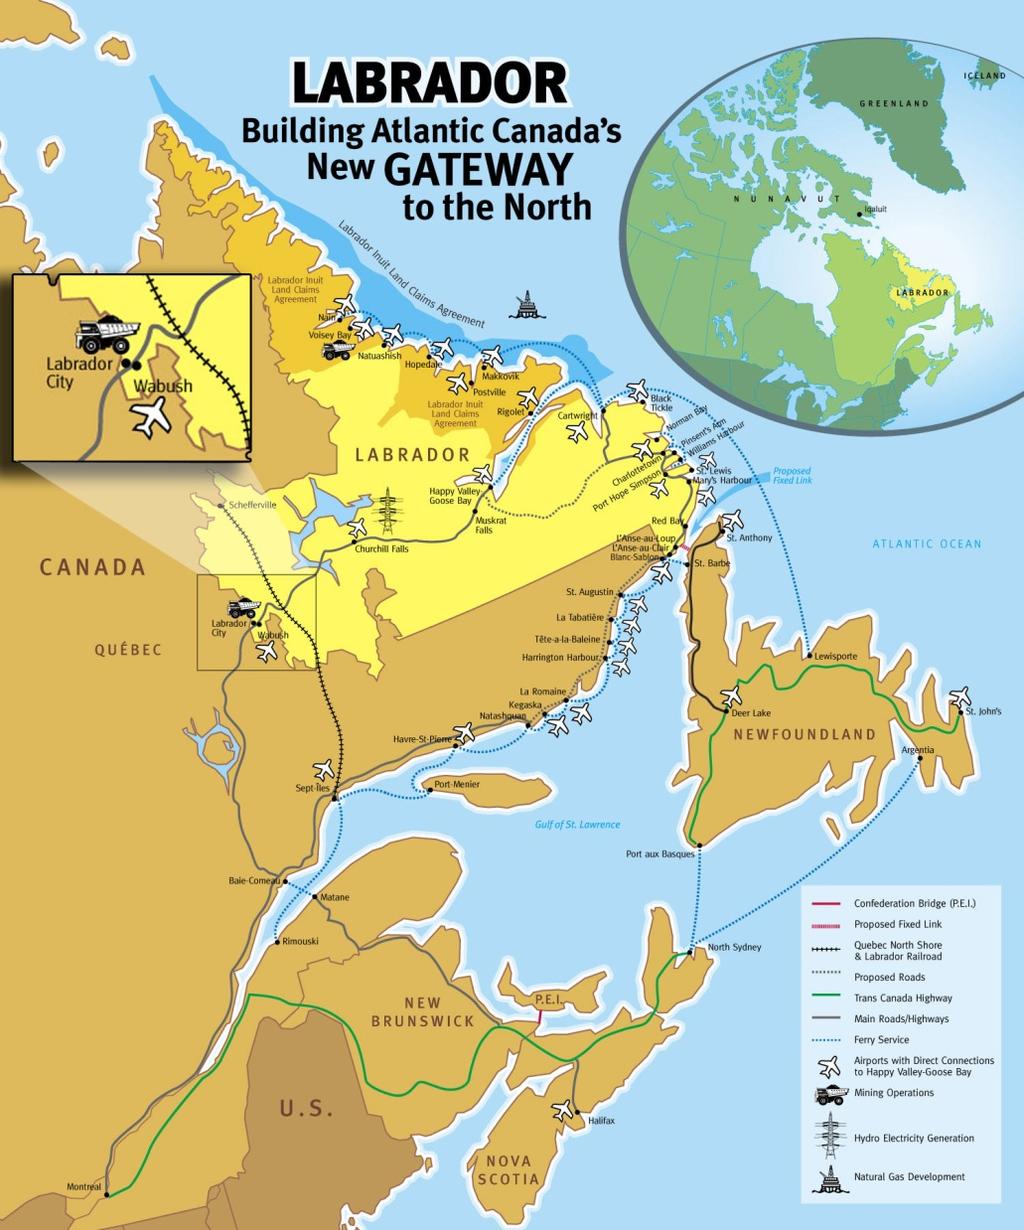 Where we are and how to get there Airline service by 2 major carriers to Wabush Airport 570 km by road from